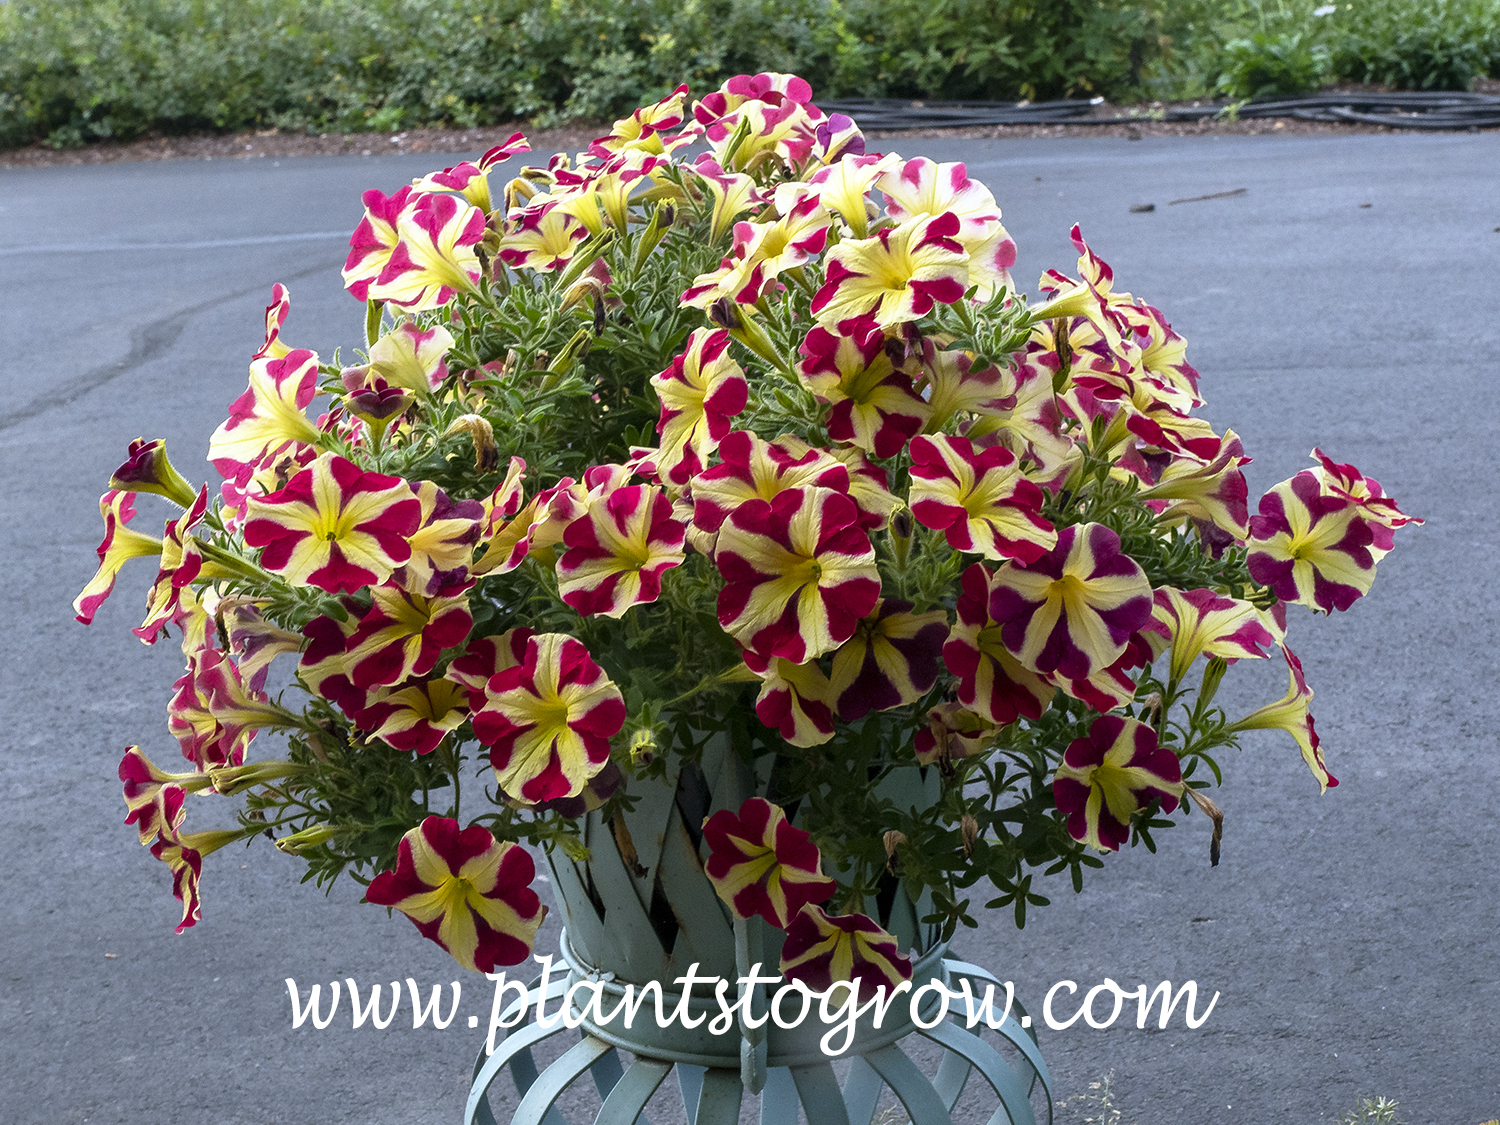 'Amore Queen of Hearts' Petunia
A single red with yellow stripes.  Each red area forms a heart.